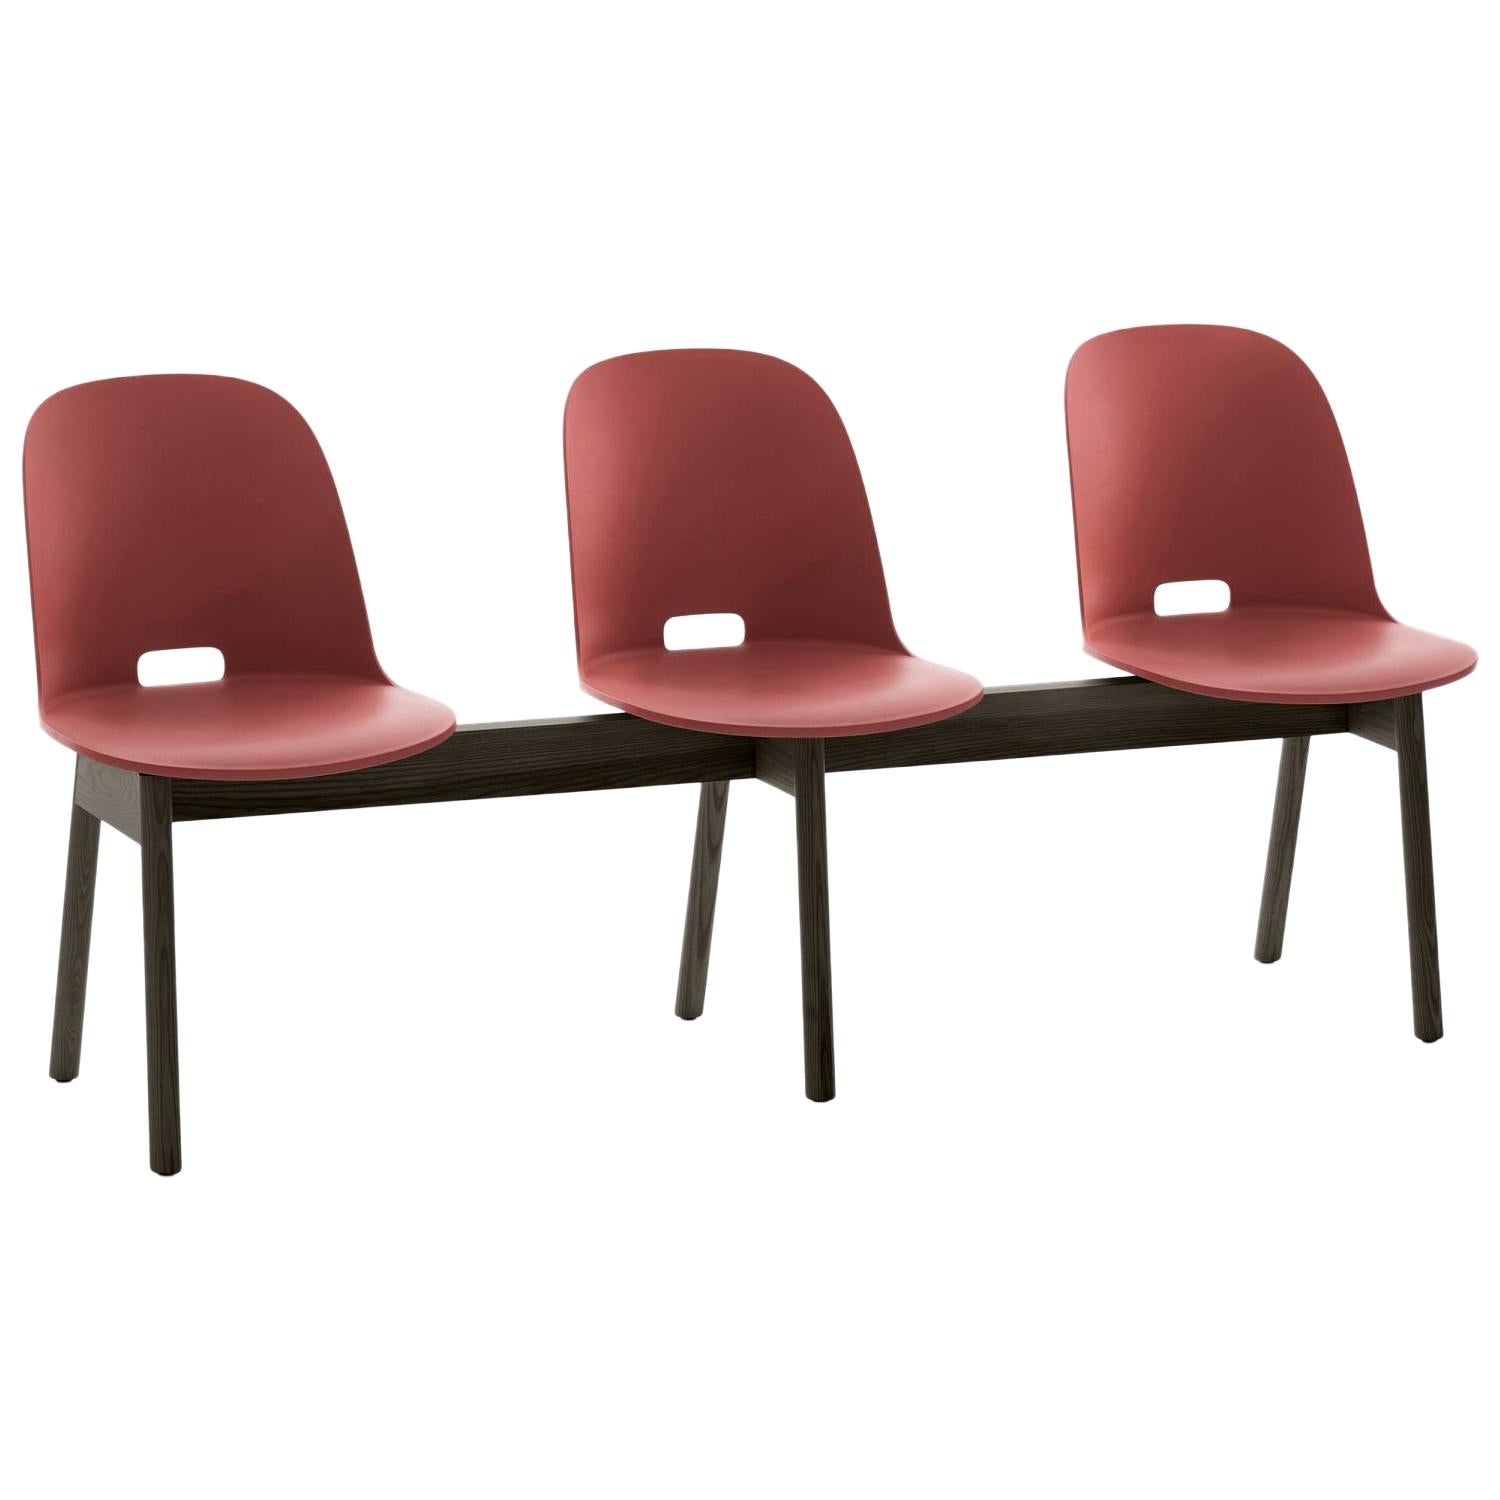 Emeco Alfi 3-Seat Bench in Red and Dark Ash with High Back by Jasper Morrison For Sale